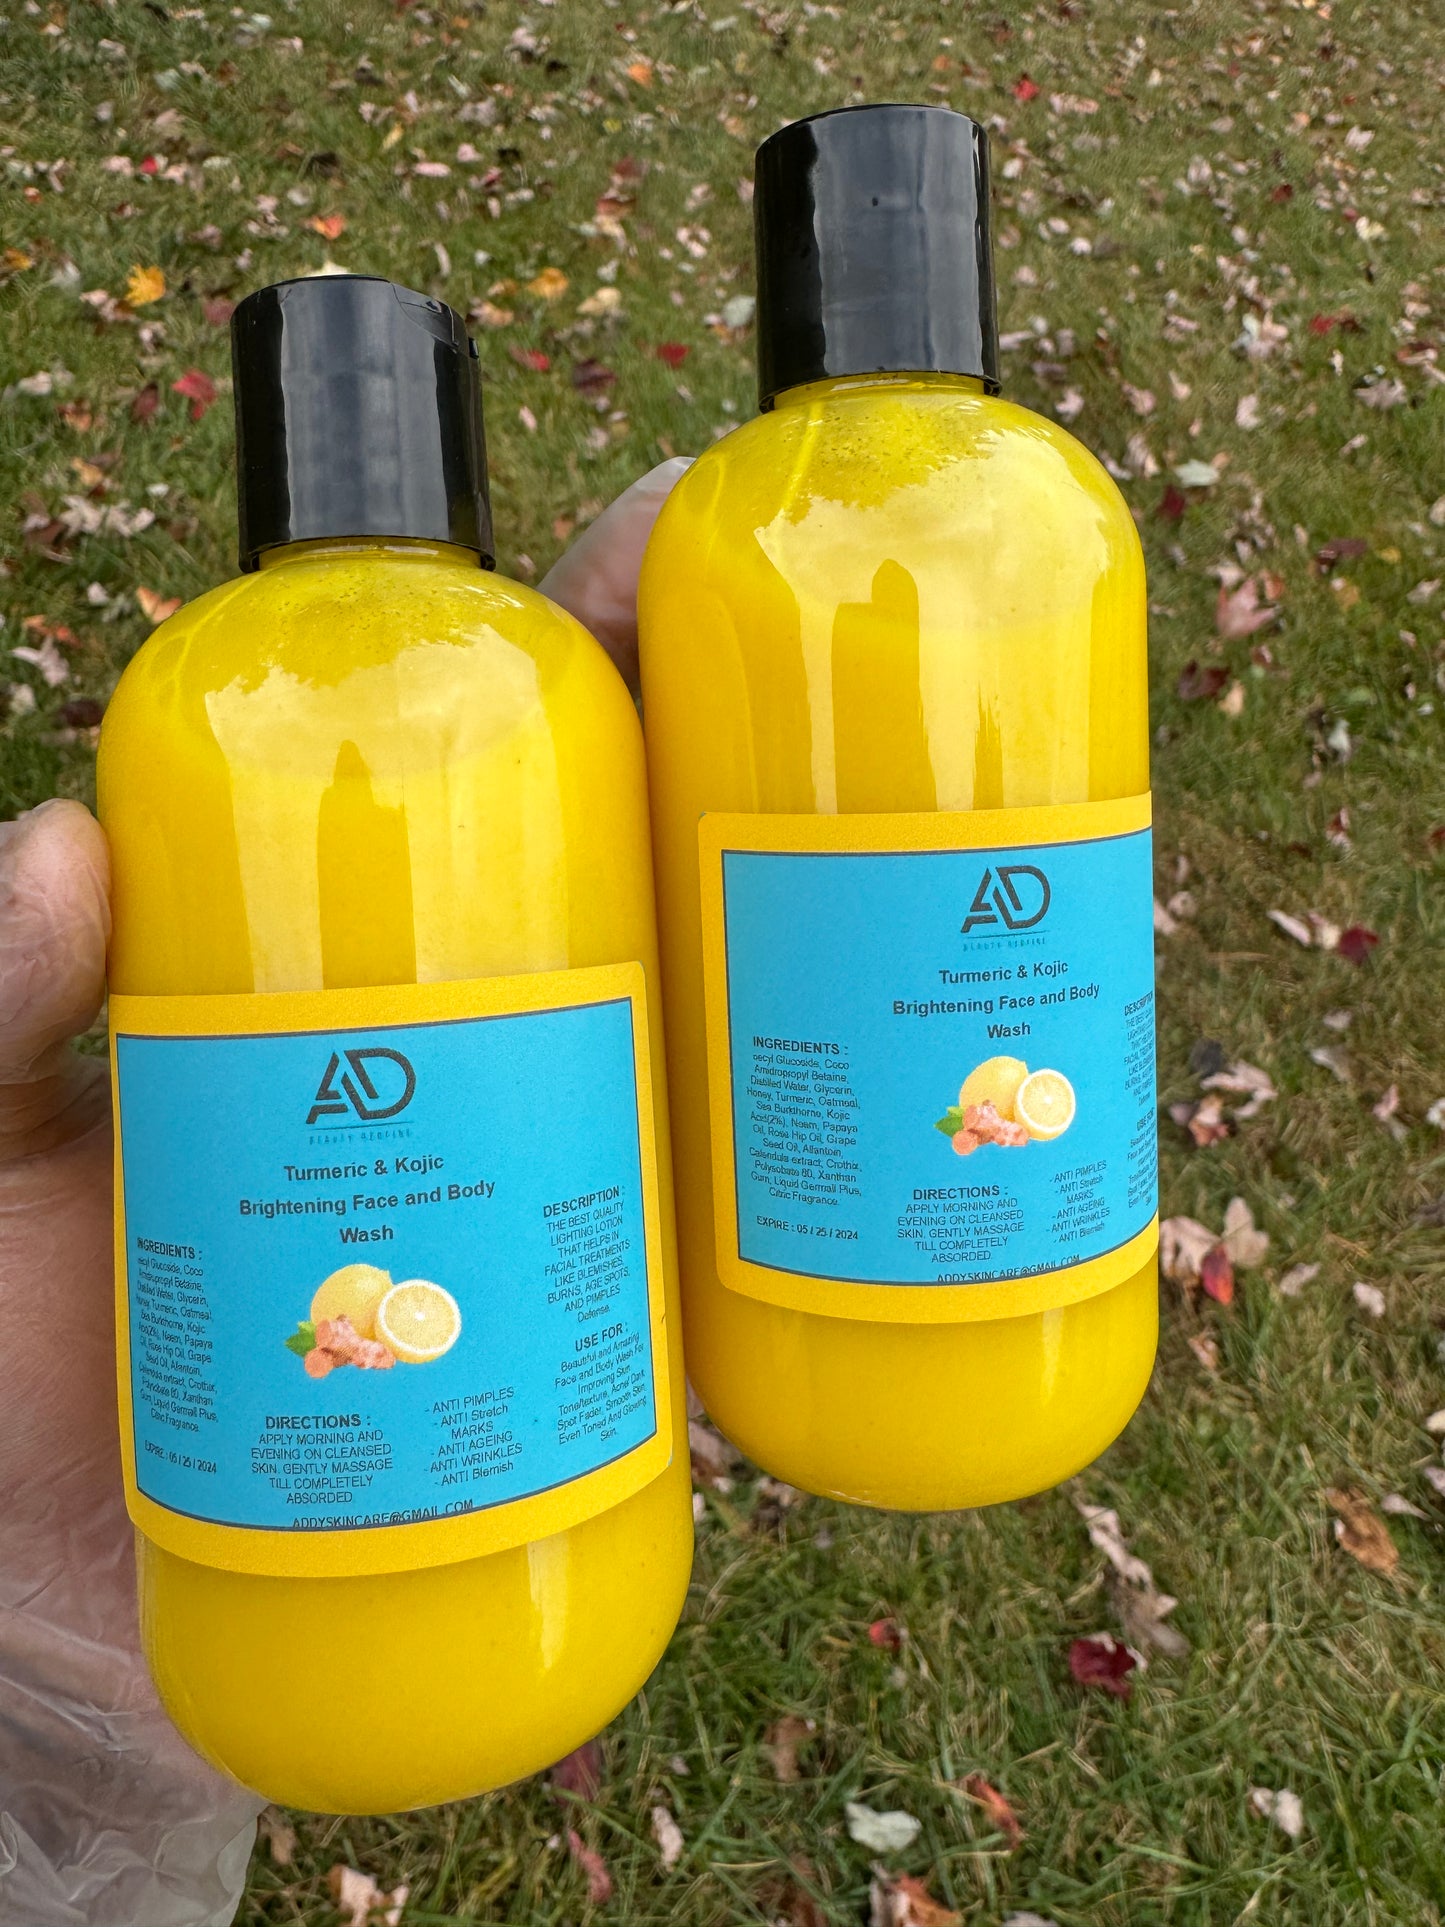 TURMERIC AND KOJIC BRIGHTENING FACE AND BODY WASH